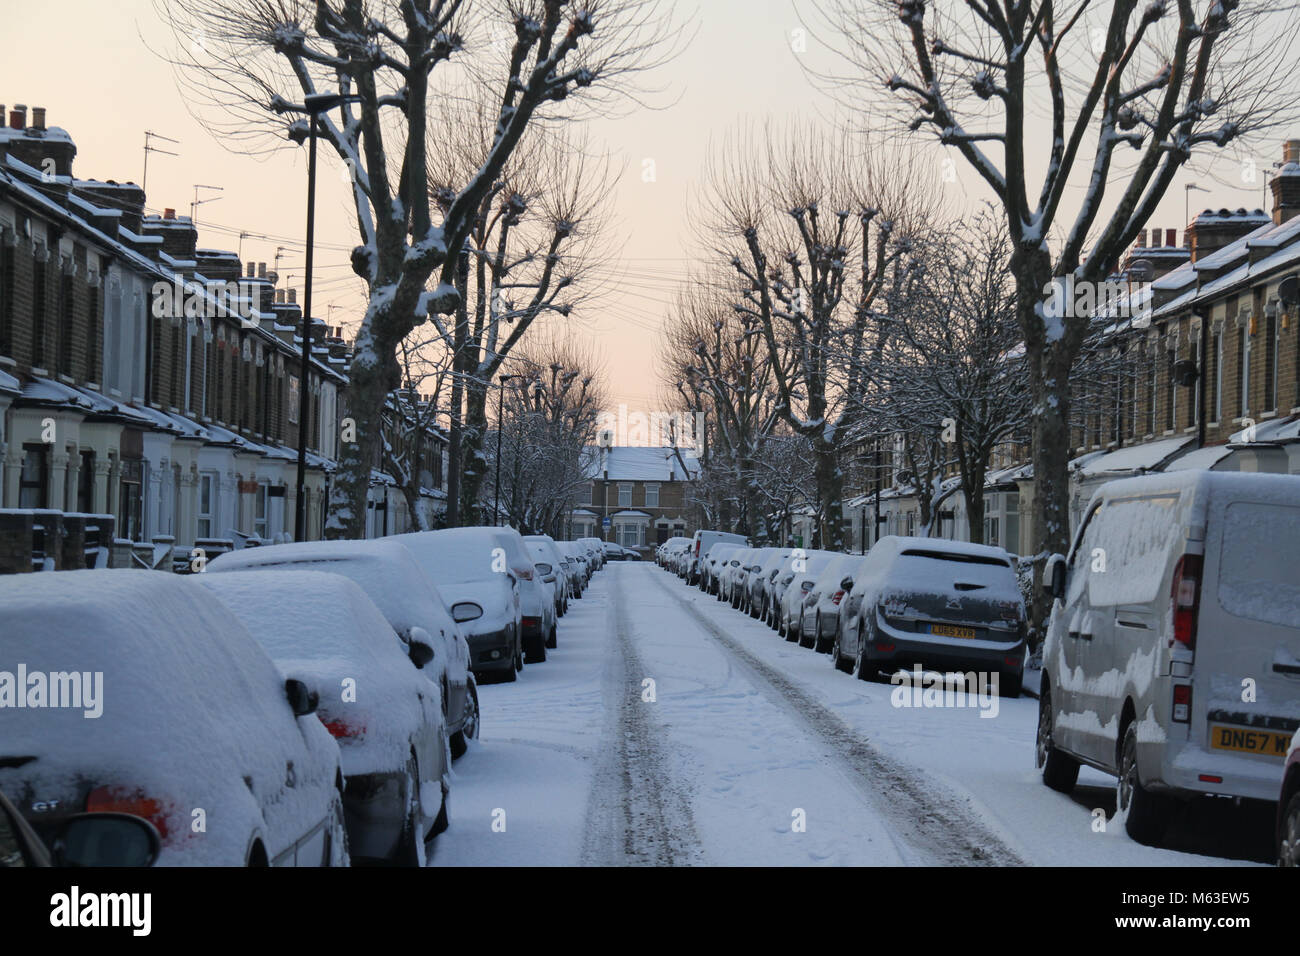 LONDON, UK - February 28: Streets of East London were covered with snow following a shower on 28 February. The Met Department issued an amber warning causing airport closure and rail cancellation Credit: David Mbiyu/Alamy Live News Stock Photo